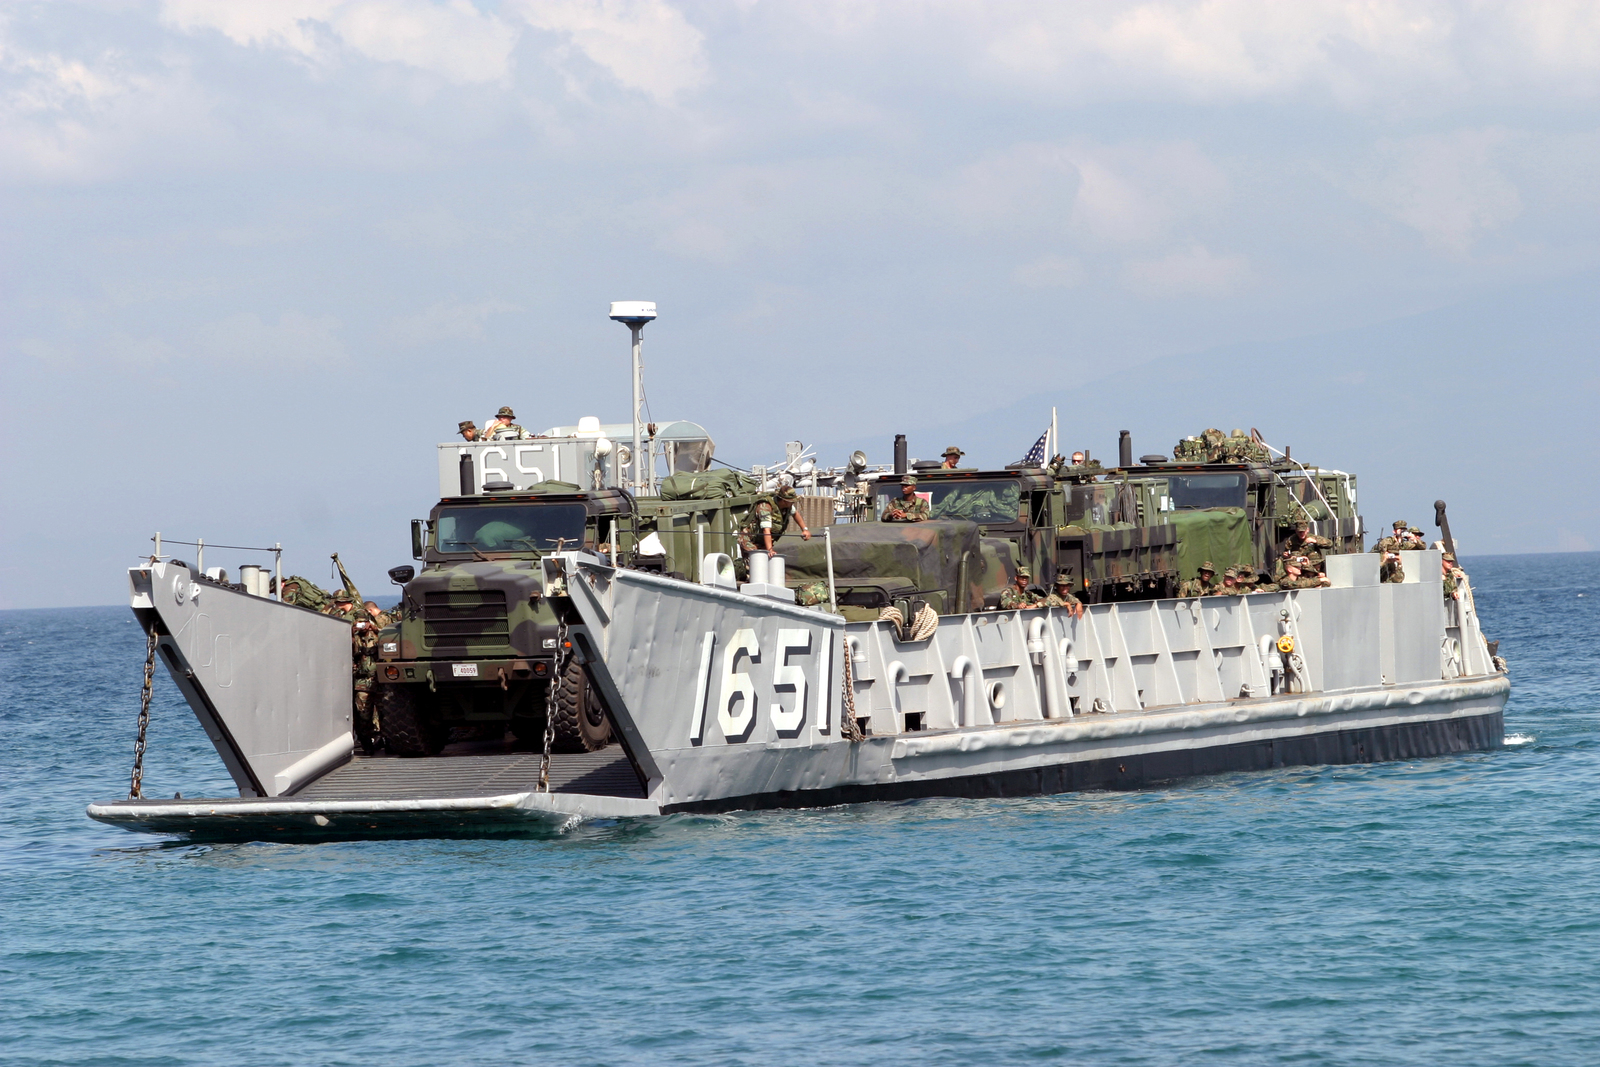 CU)_arrives_just_offshore_to_unload_supplies_and_equipment_in_support_of_exercise_Balikatan_2004.jpg